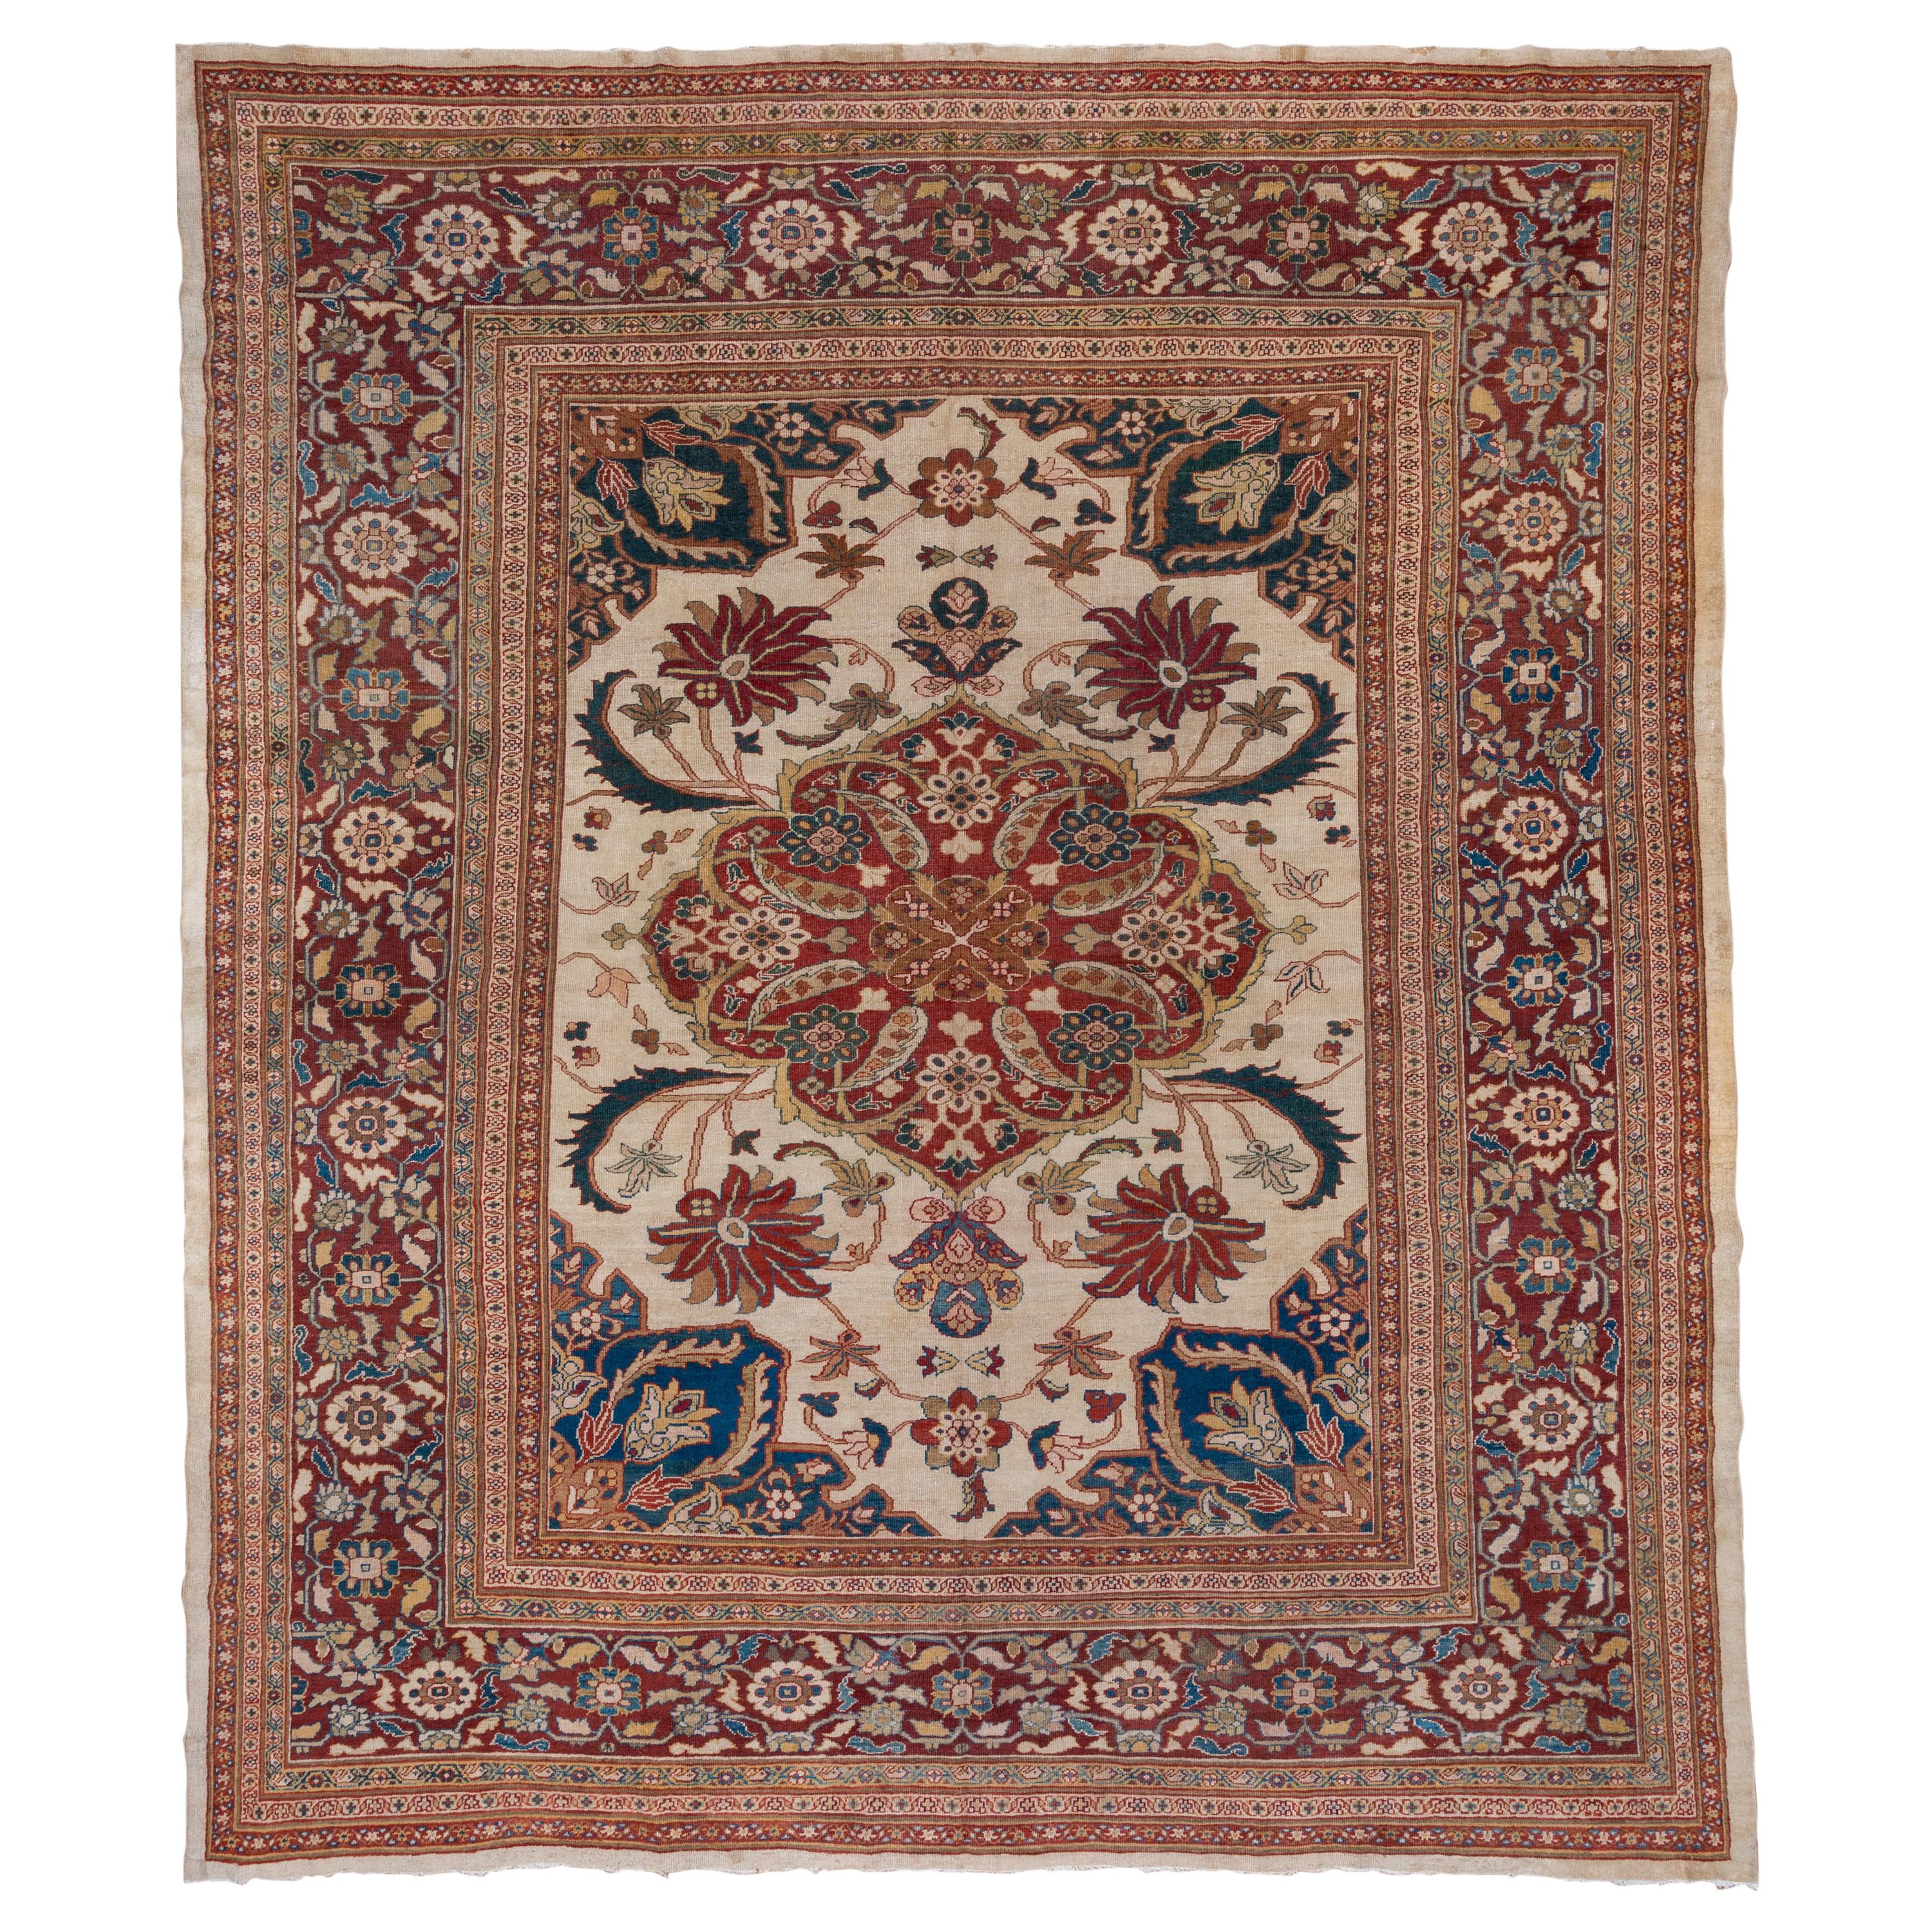 Large Antique Persian Sultanabad Crpet, circa 1890s